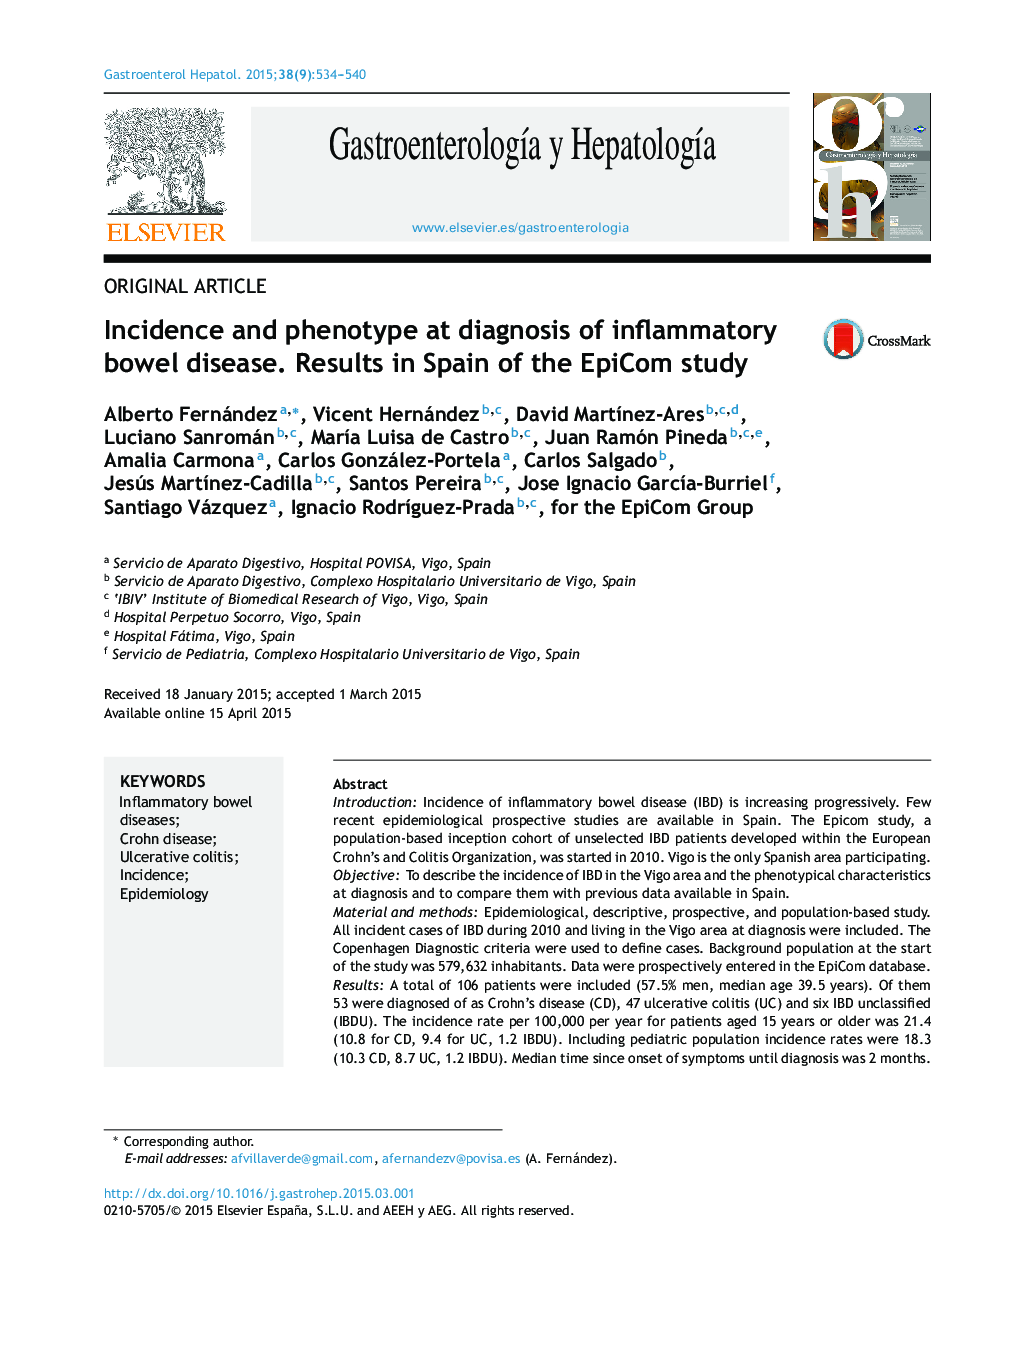 Incidence and phenotype at diagnosis of inflammatory bowel disease. Results in Spain of the EpiCom study